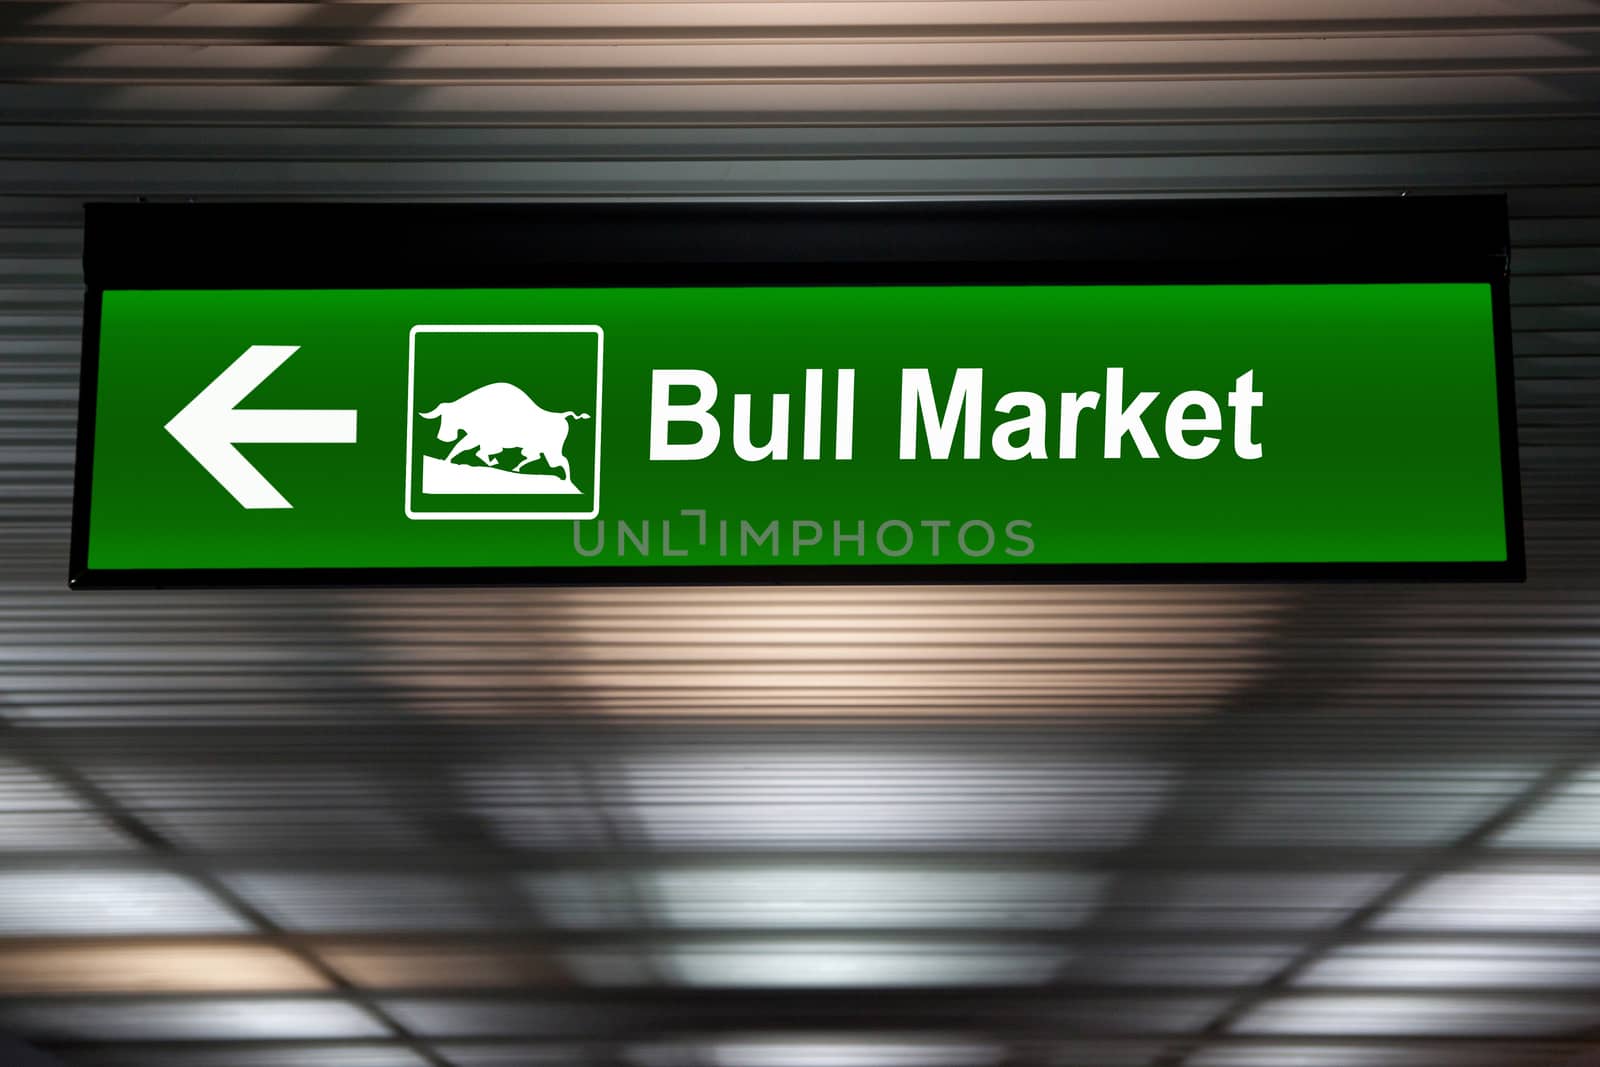 Financial concept. indicated stock market activity. A modified sign indicating a bull market ahead. Green color